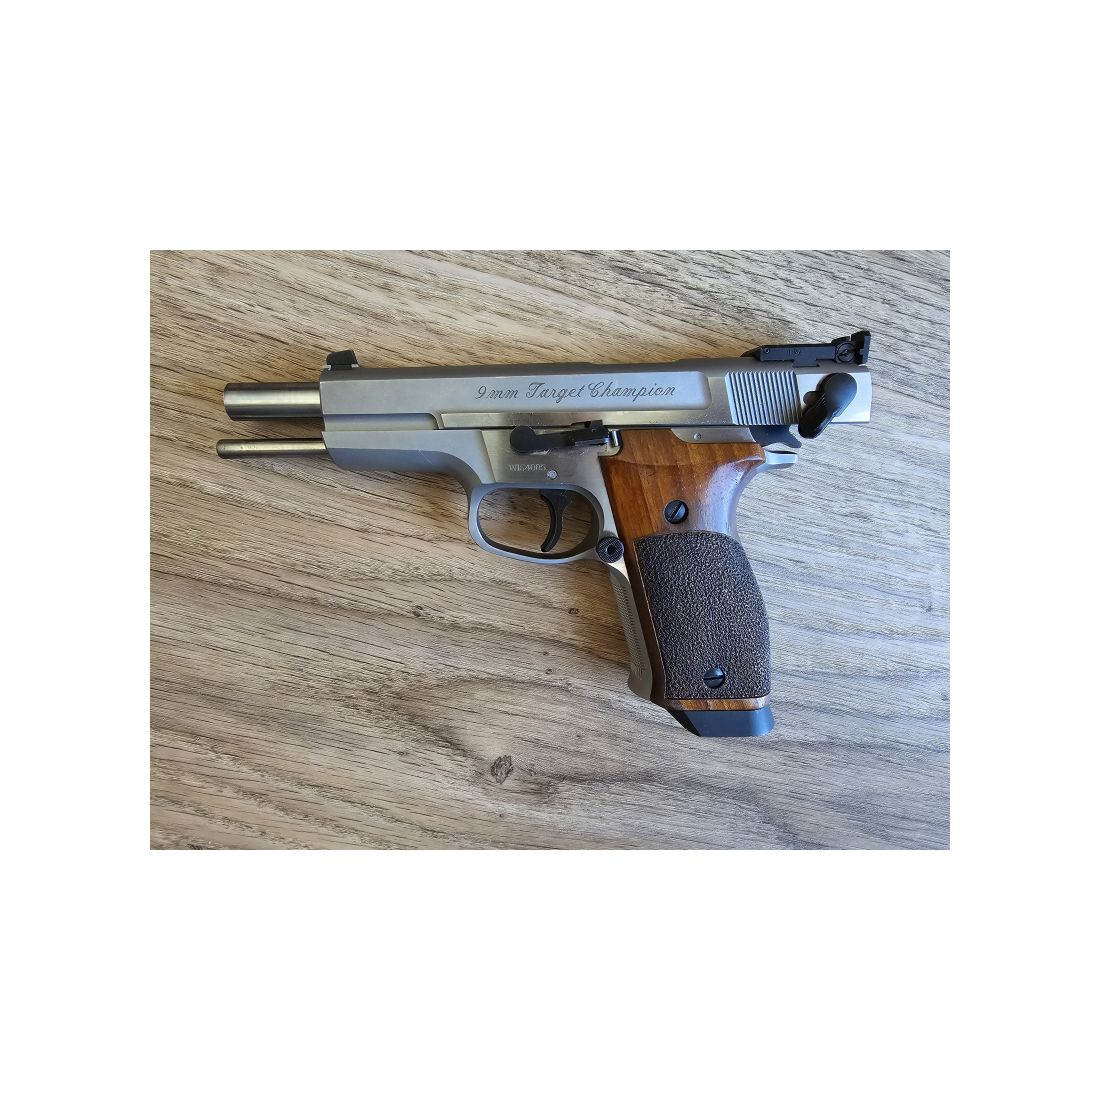 Smith & Wesson Target Champion 9mm